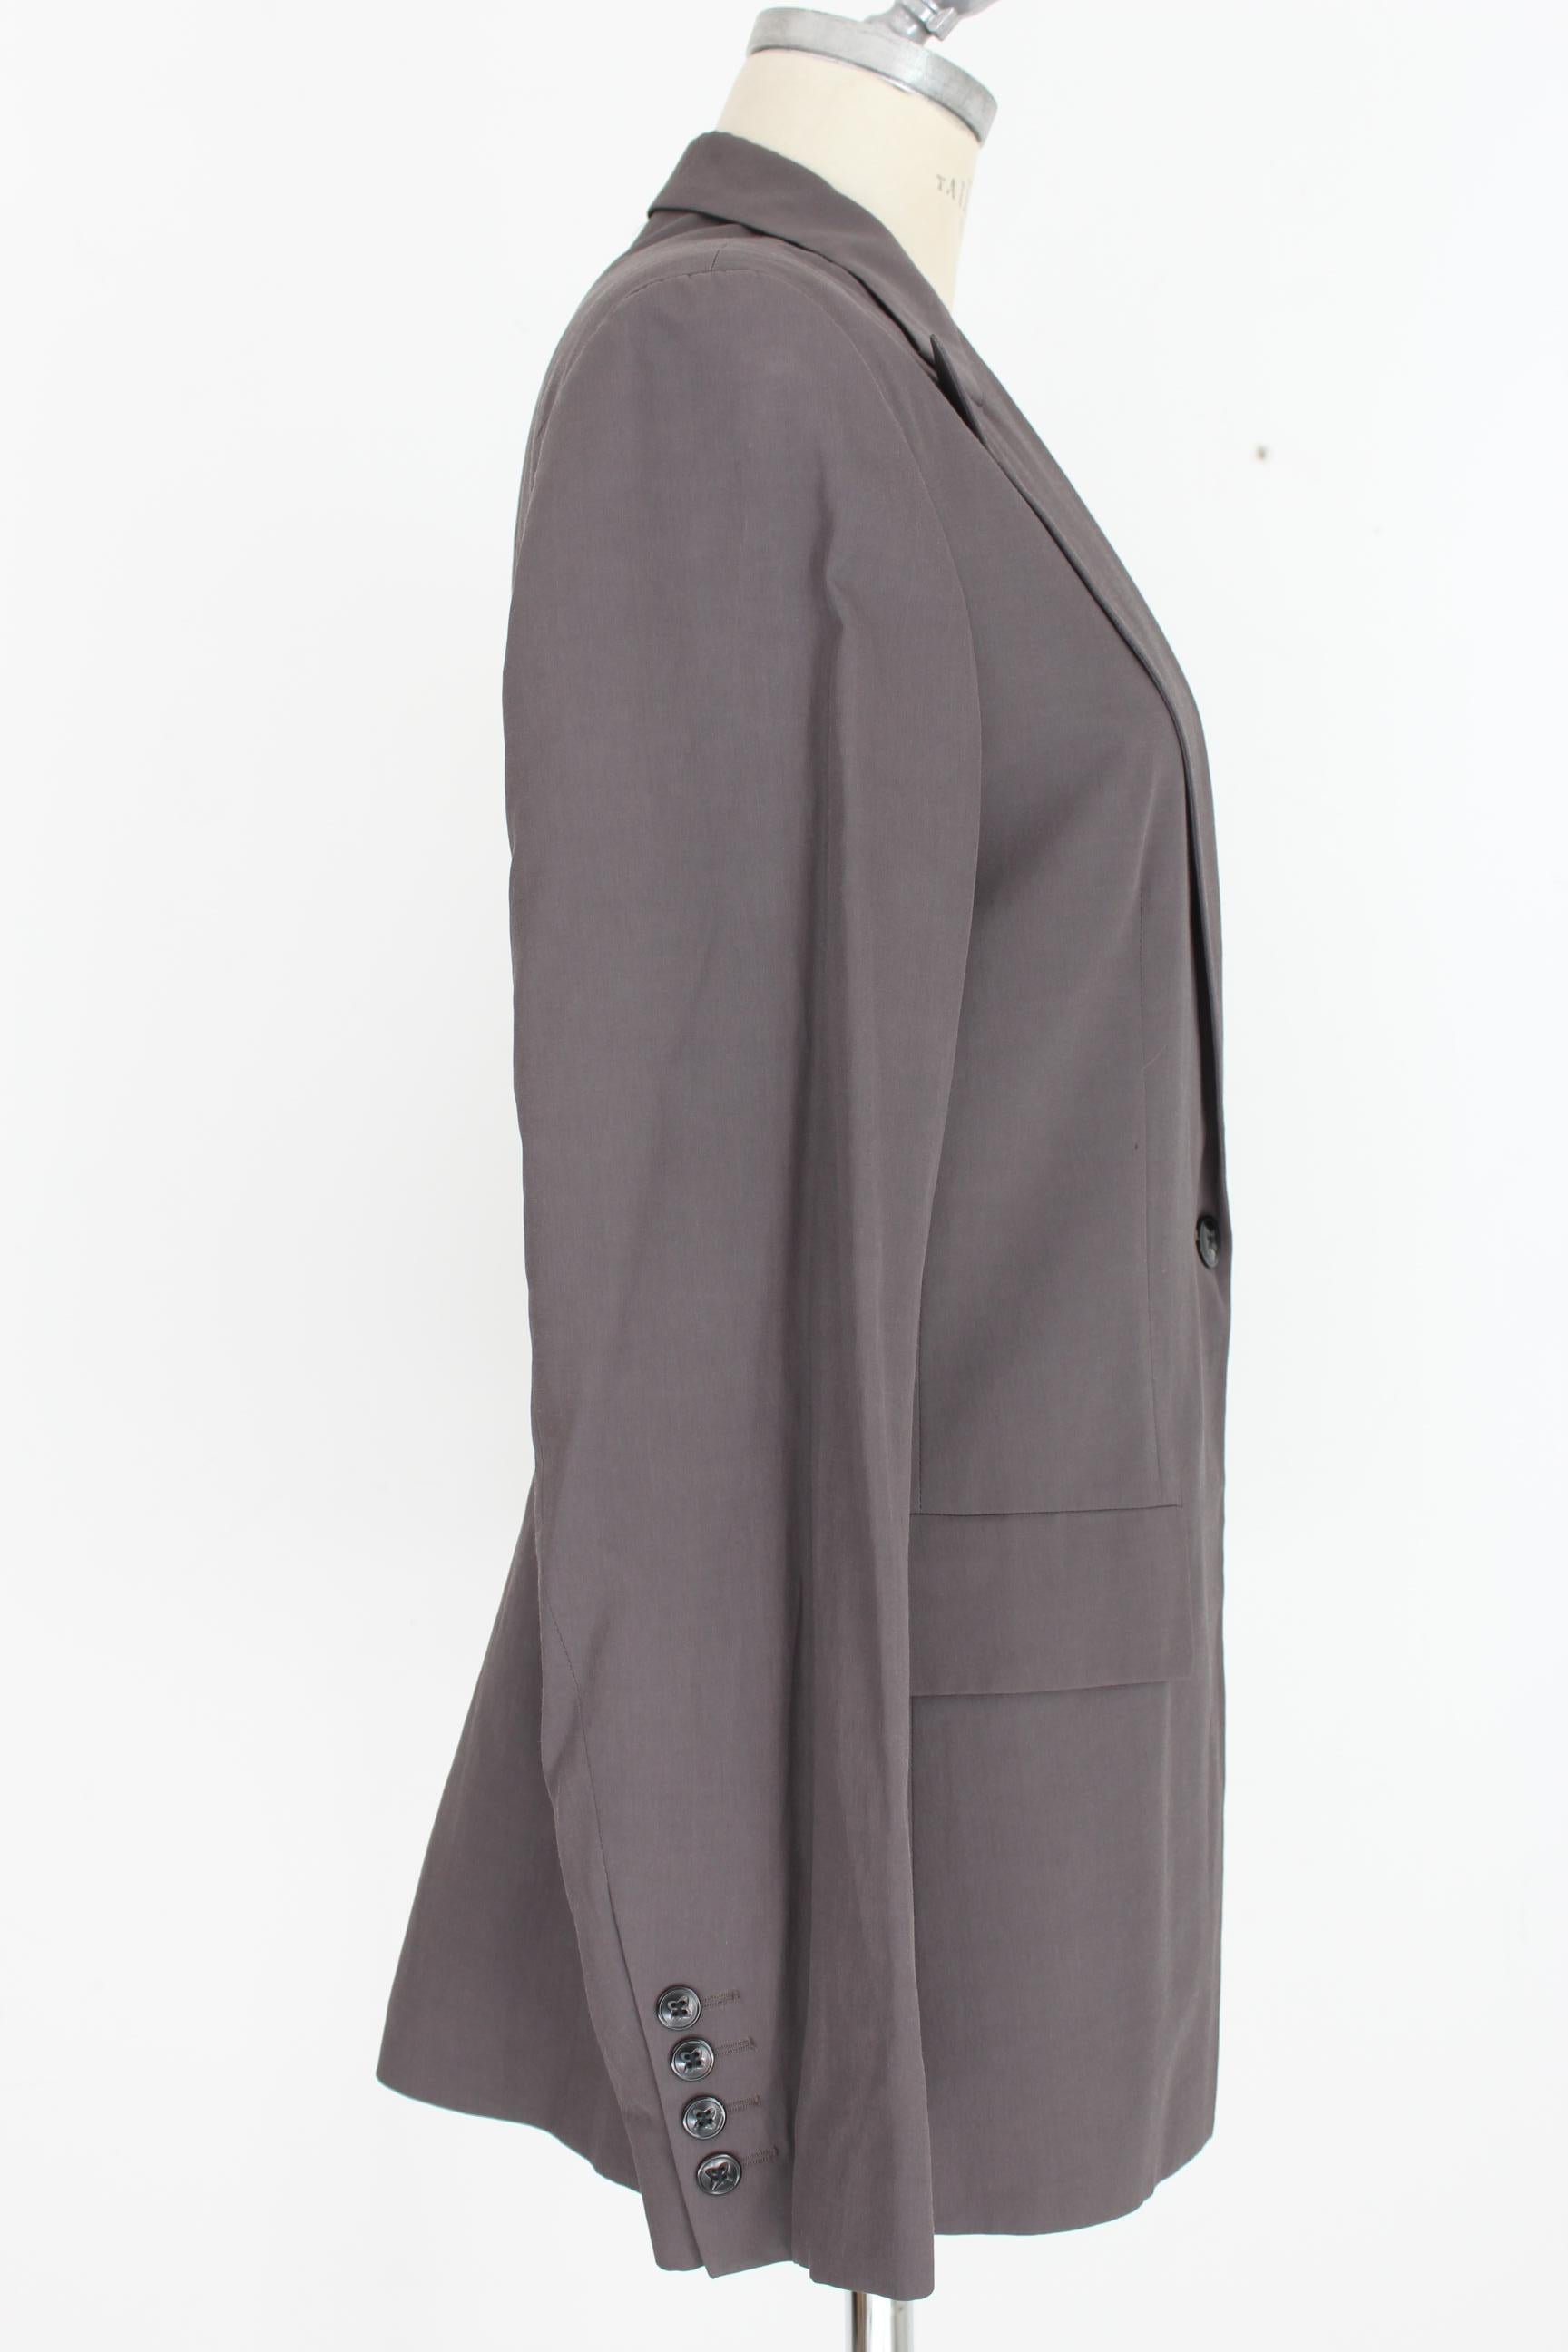 Dries Van Noten Gray Cotton Flared Evening Embroidery Jacket 1990s In Excellent Condition In Brindisi, Bt